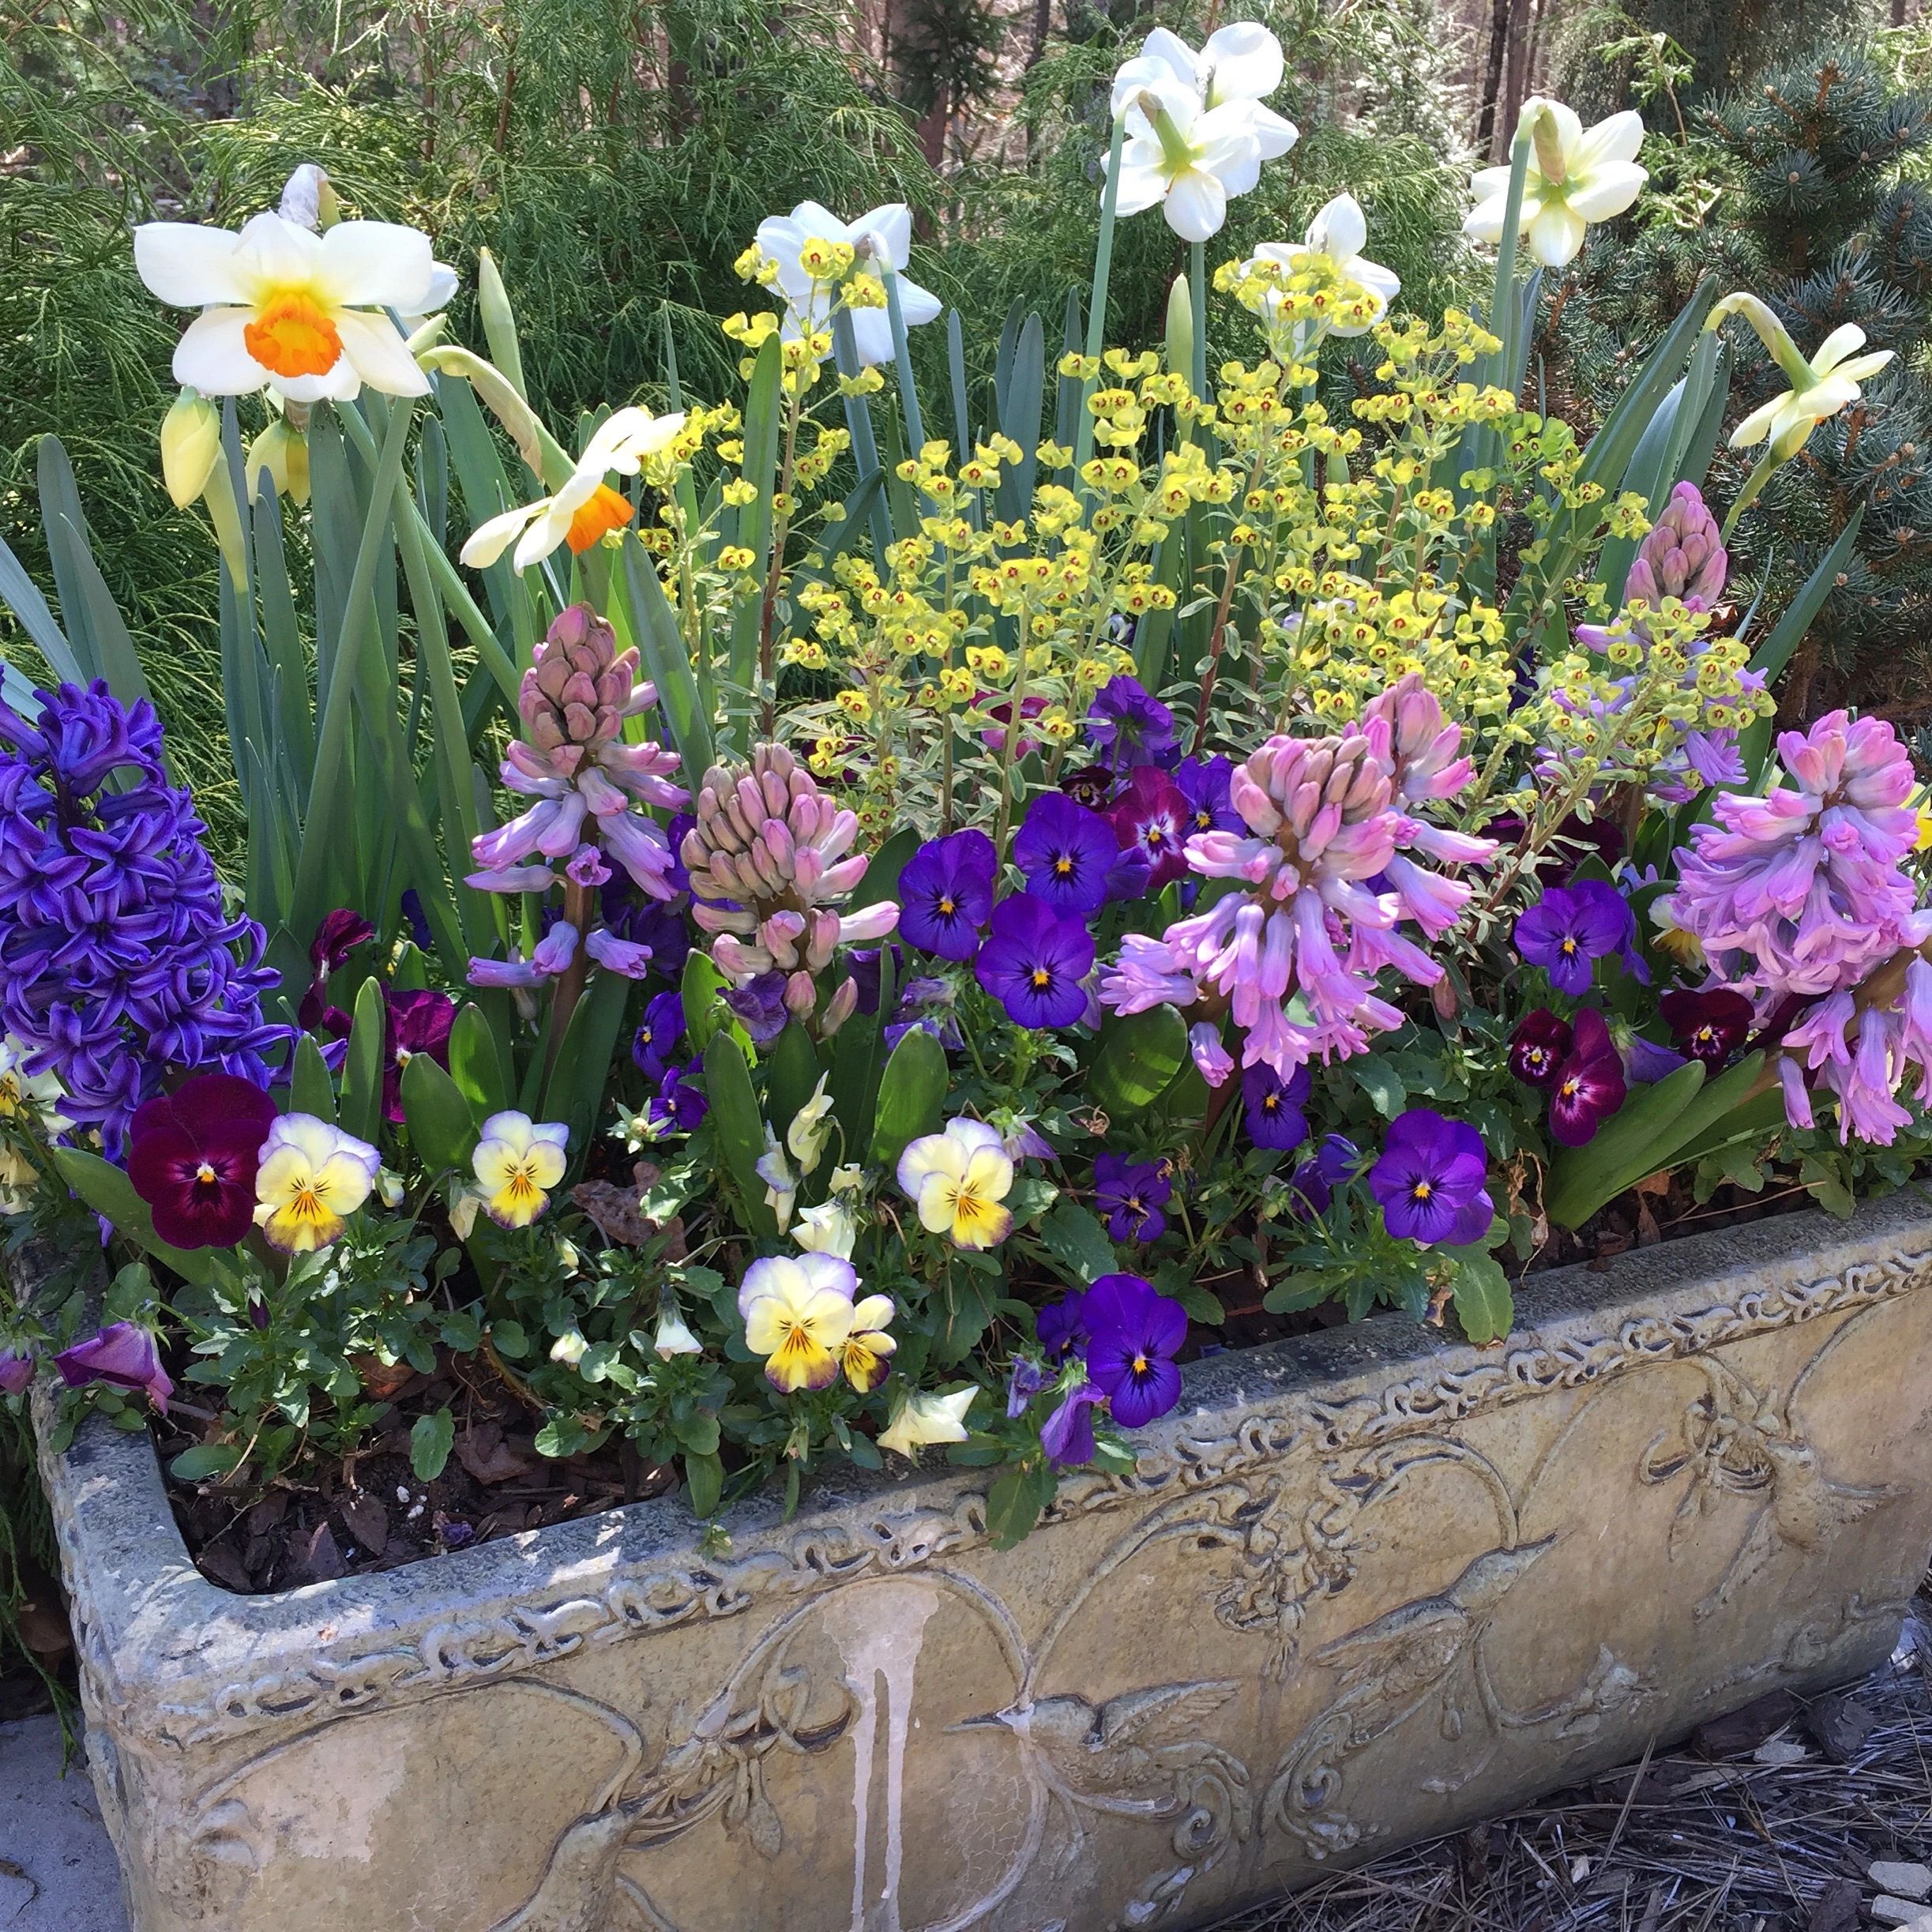 Spring bulbs in a container garden: daffodils and hyacinths with euphorbia and violas.